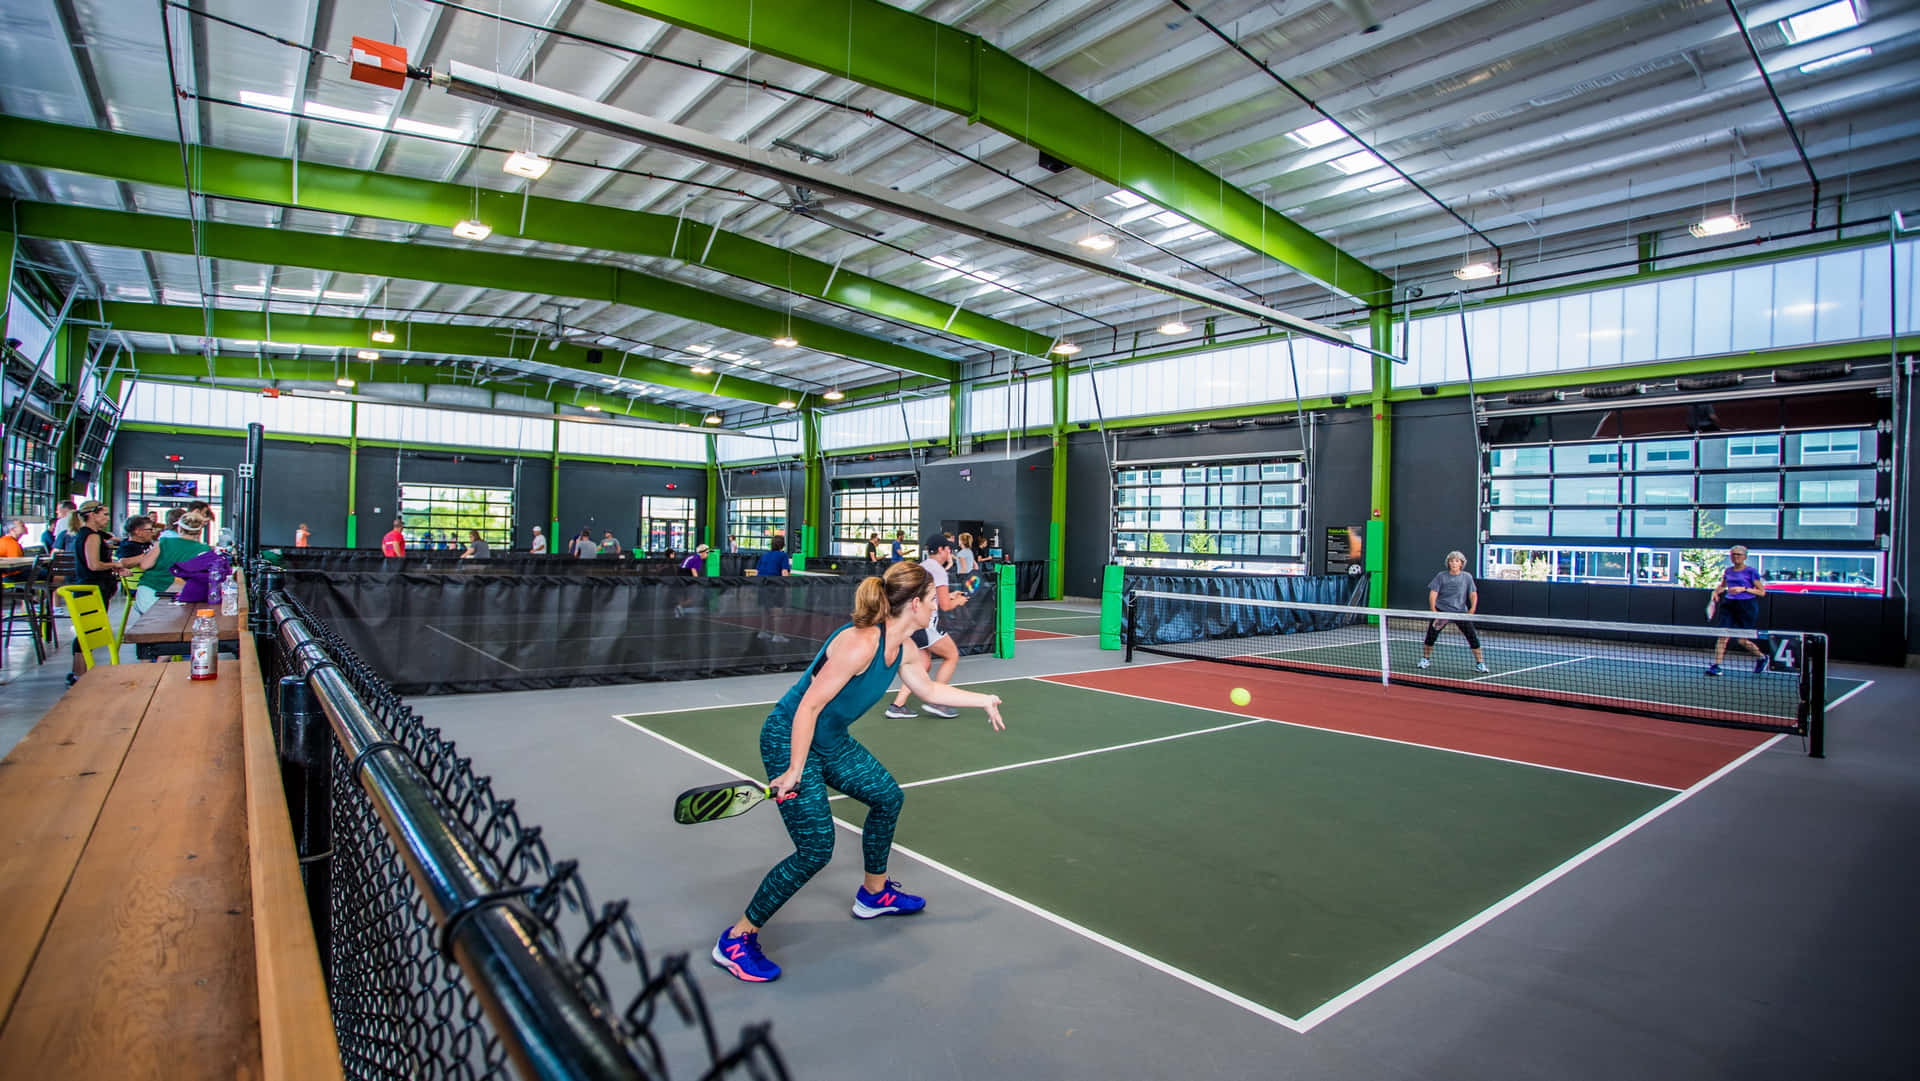 A Group Of People Playing Tennis In An Indoor Court